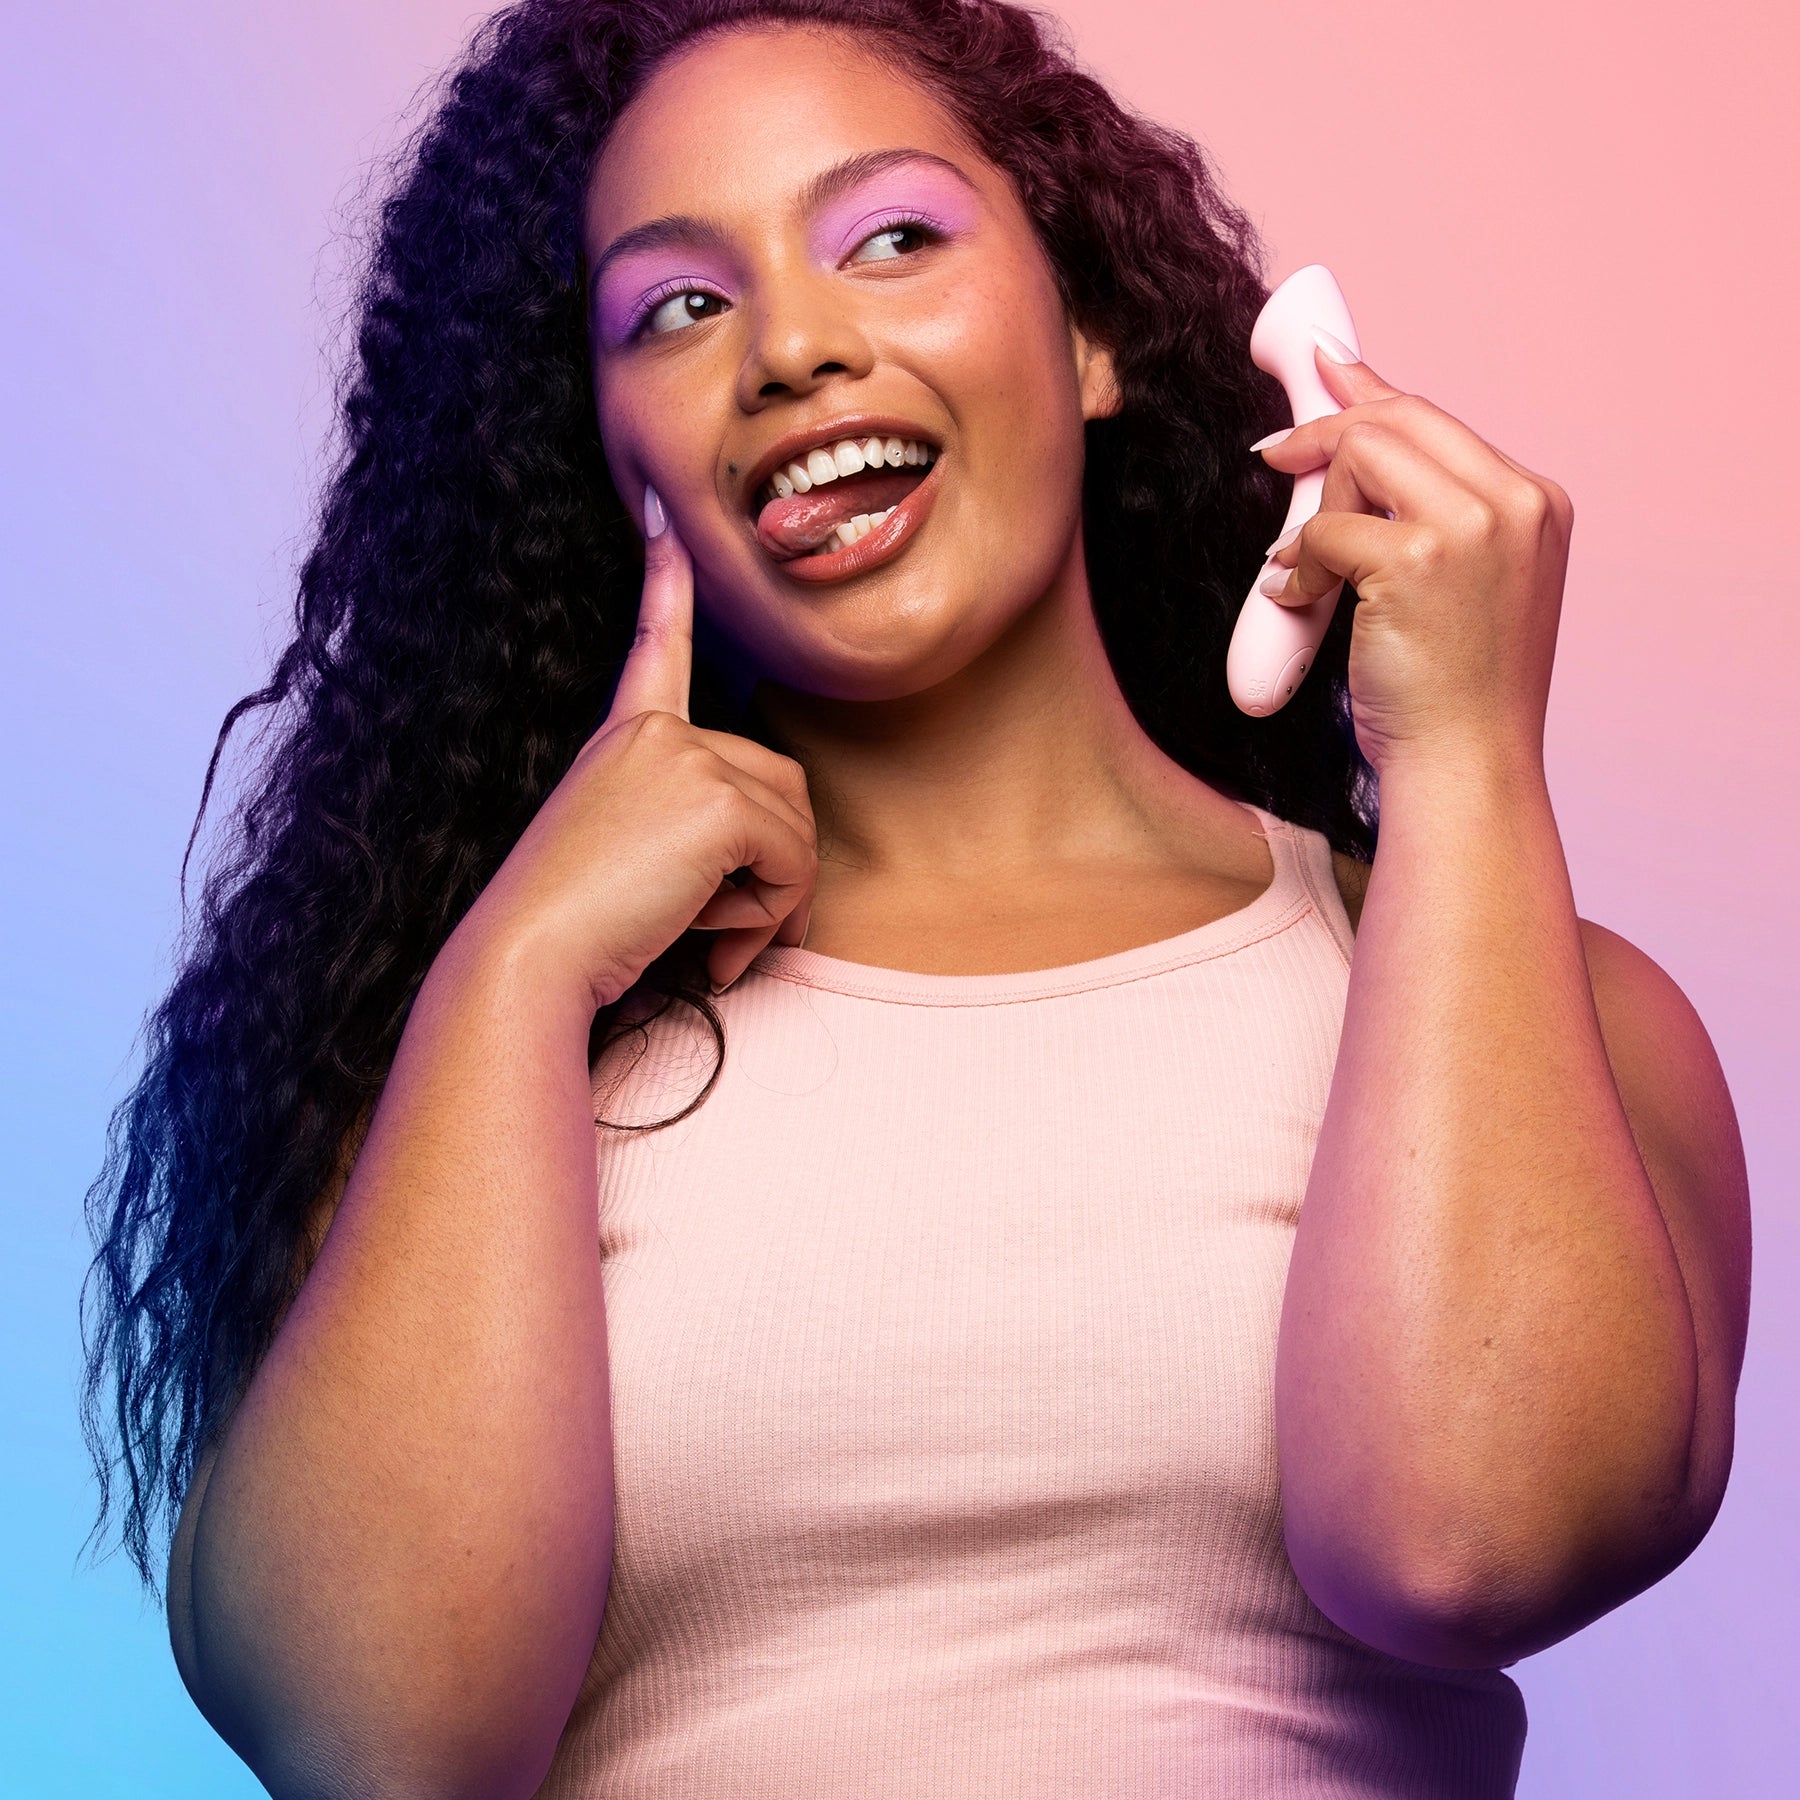 Young woman with long curly dark hair wearing baby pink tank top smiling and poking tongue out while holding VUSH Shine G Spot Vibrator against ear like a telephone